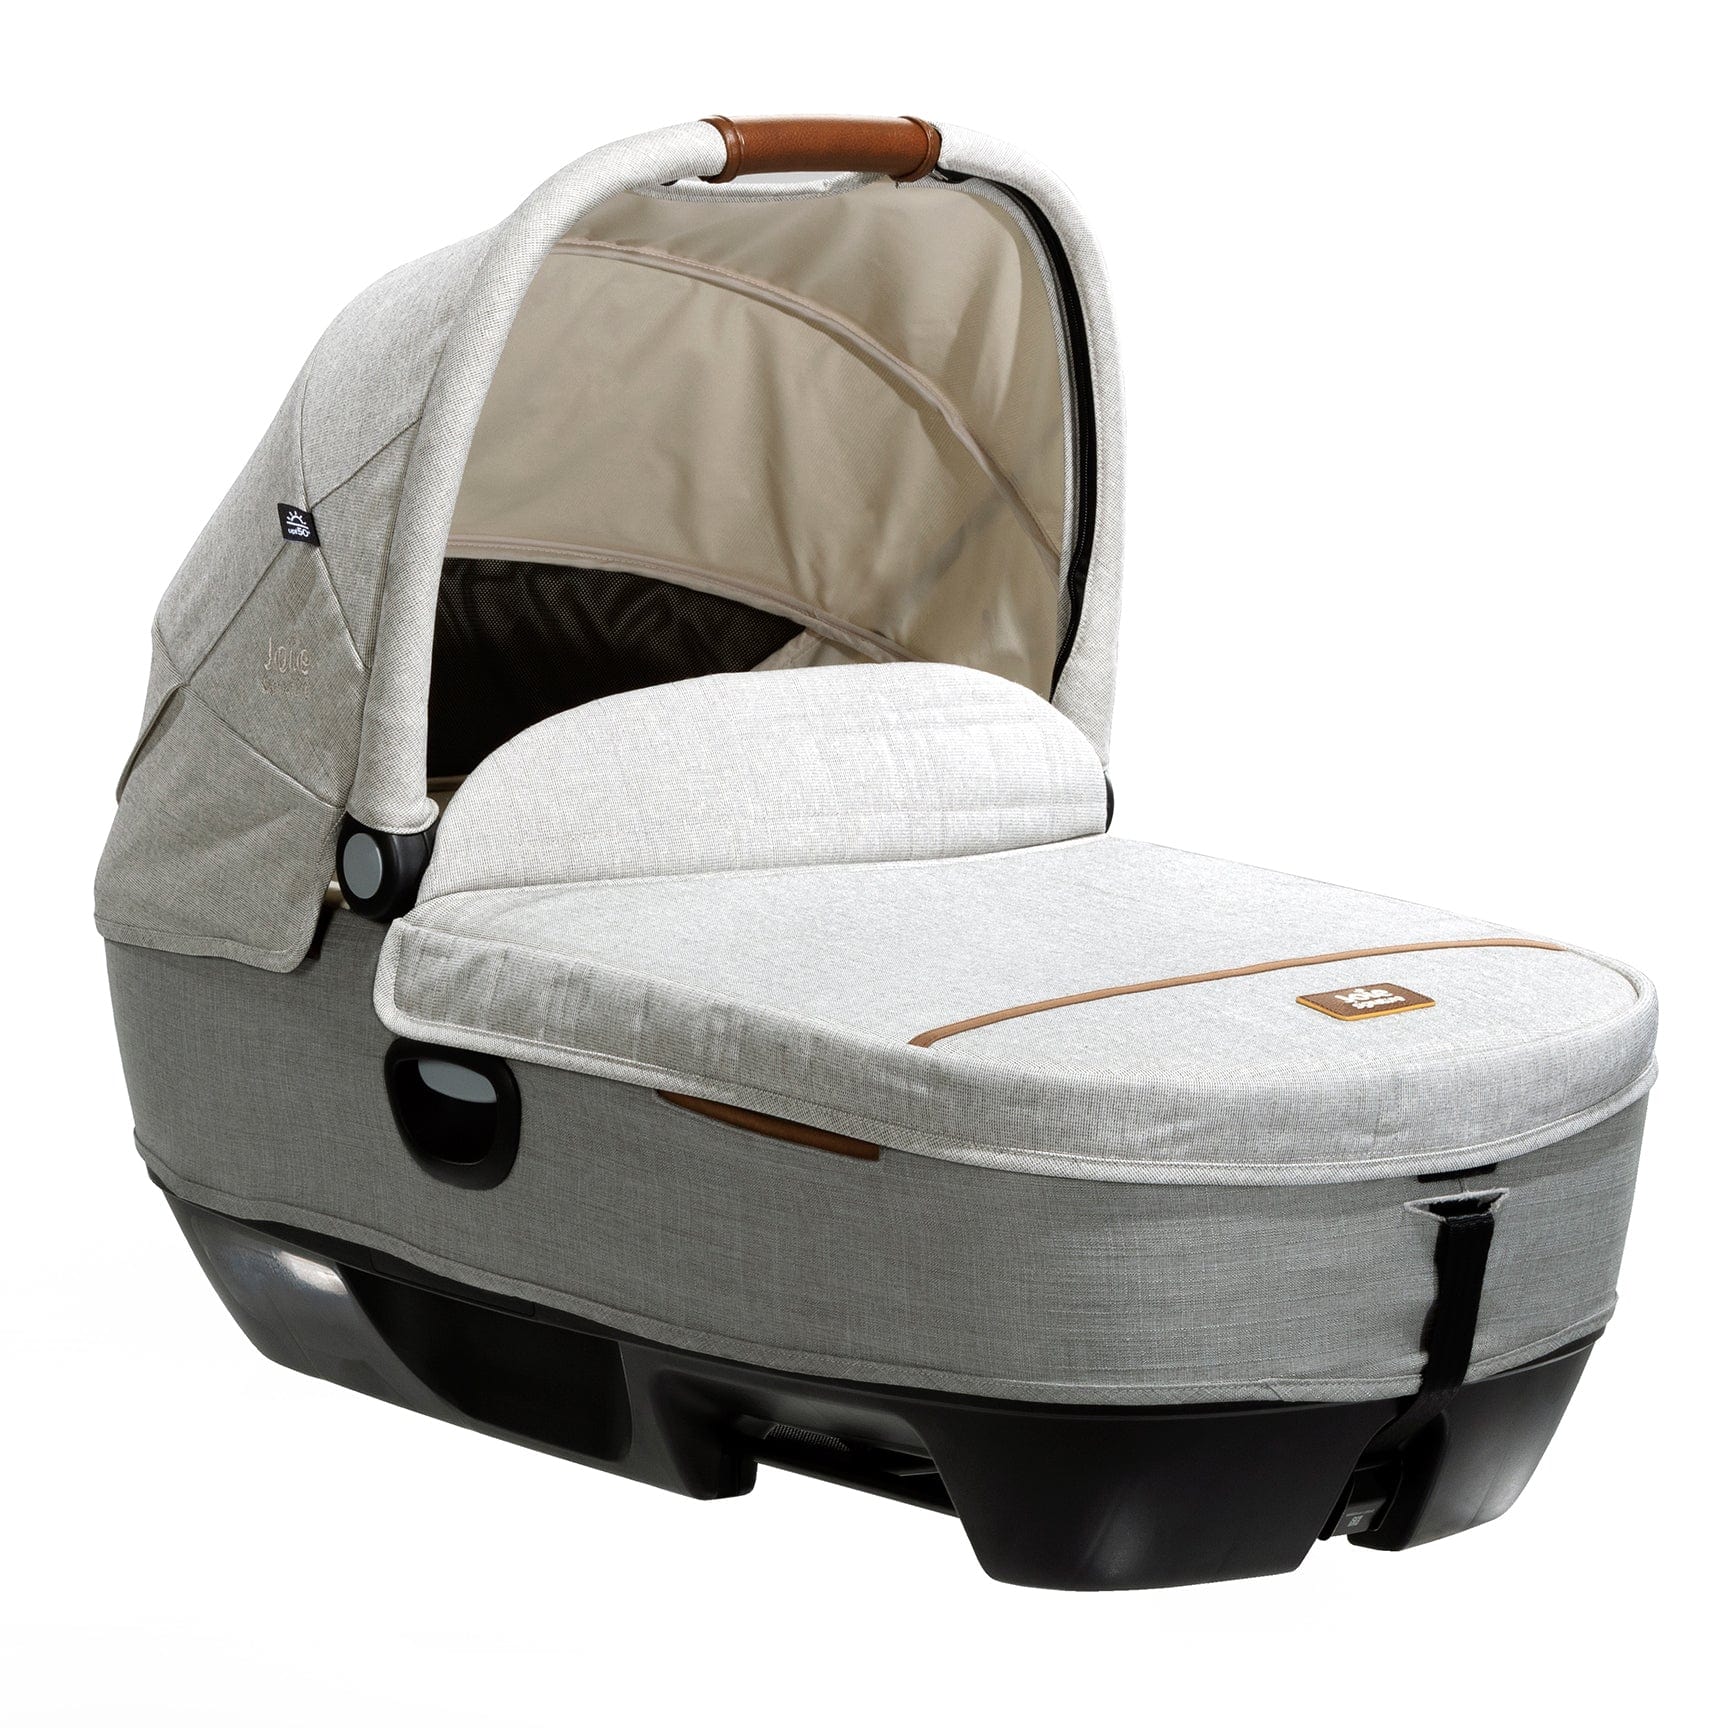 Joie lie flat car seats Joie Calmi Car Cot Bed - Oyster C2105AAOYS000